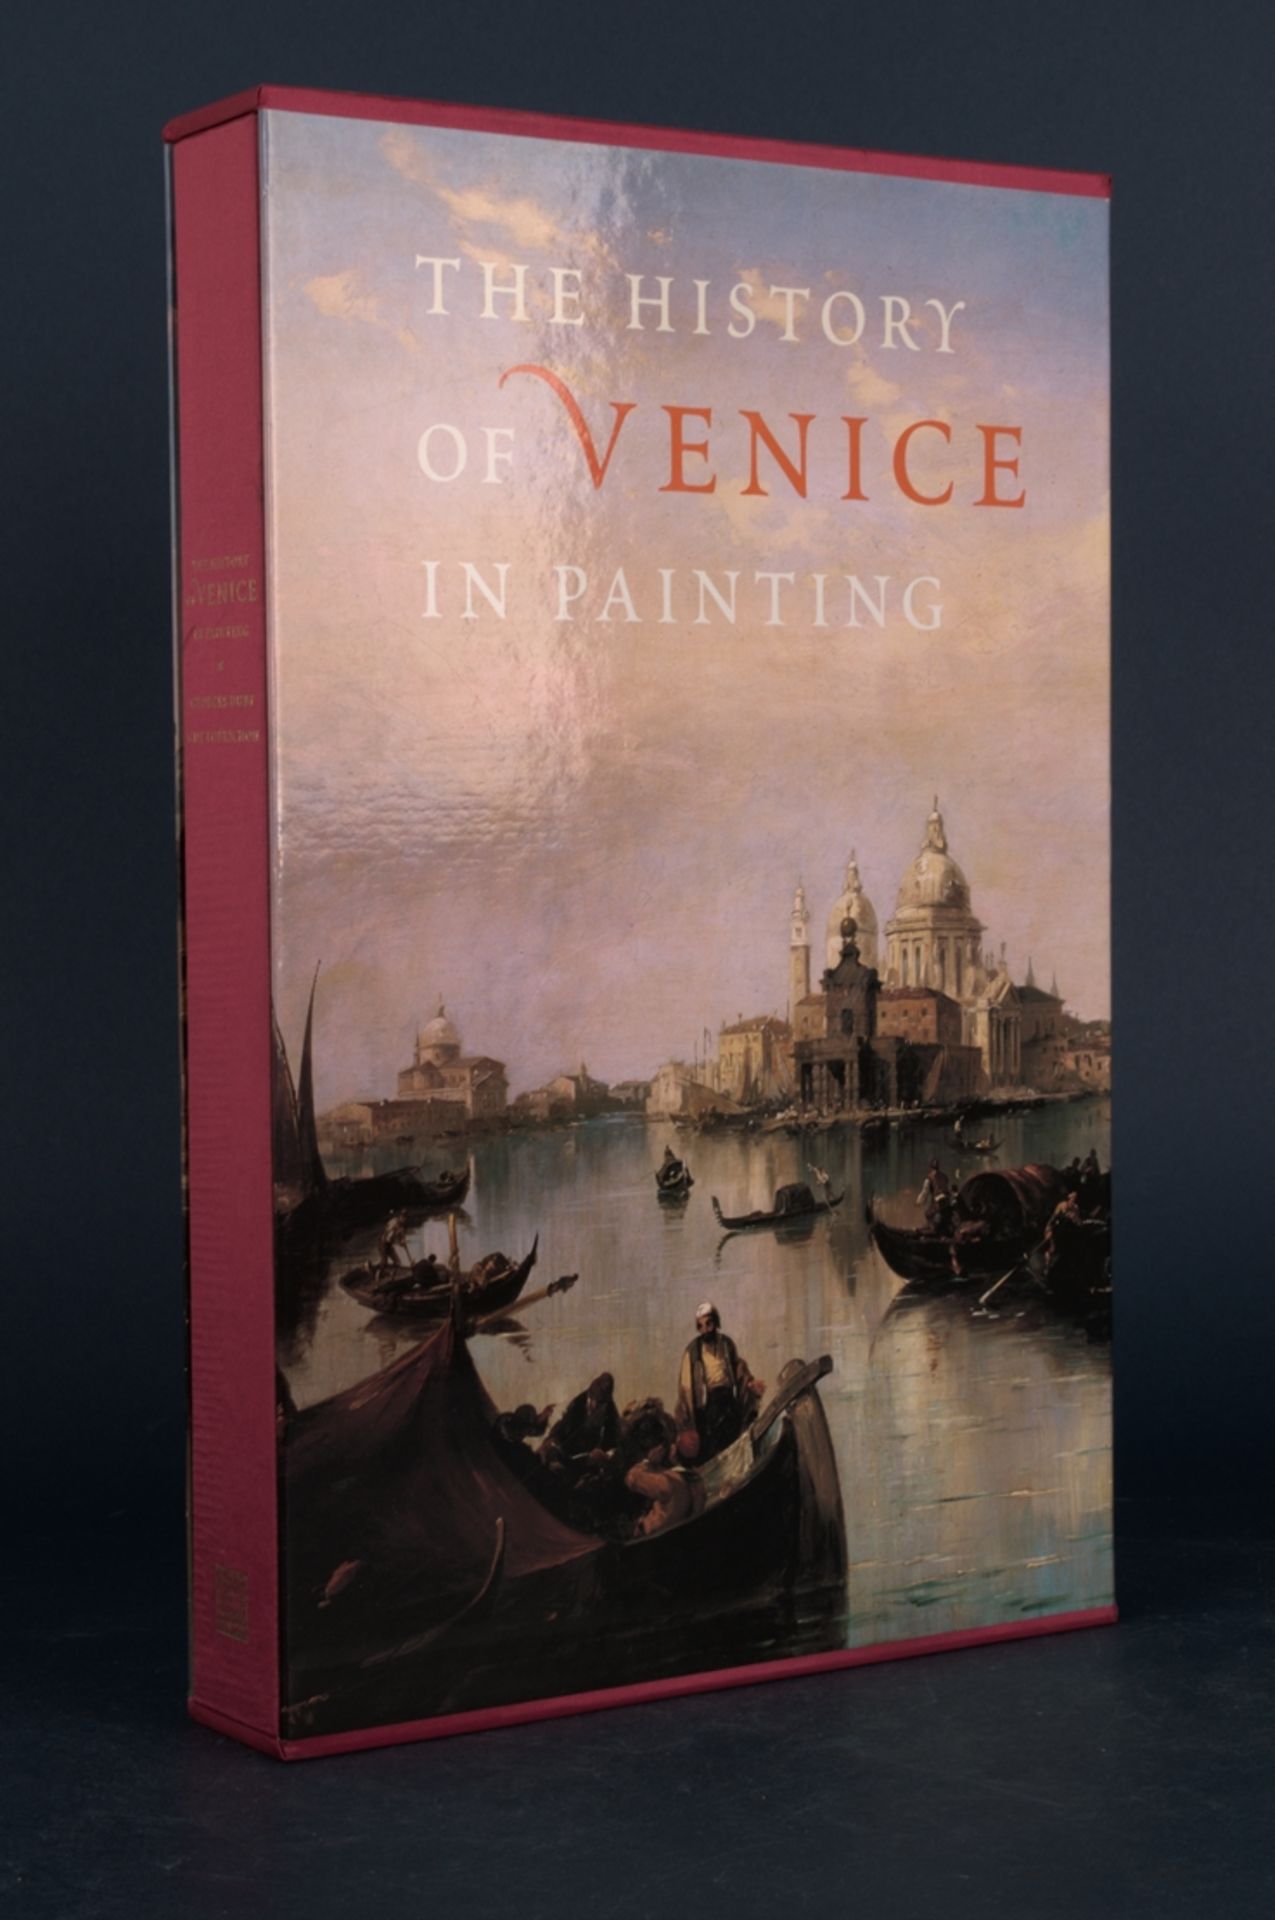 "The History of Venice in Painting", edited by Georges Duby & Guy Lobrichon, Abbeville Publishers